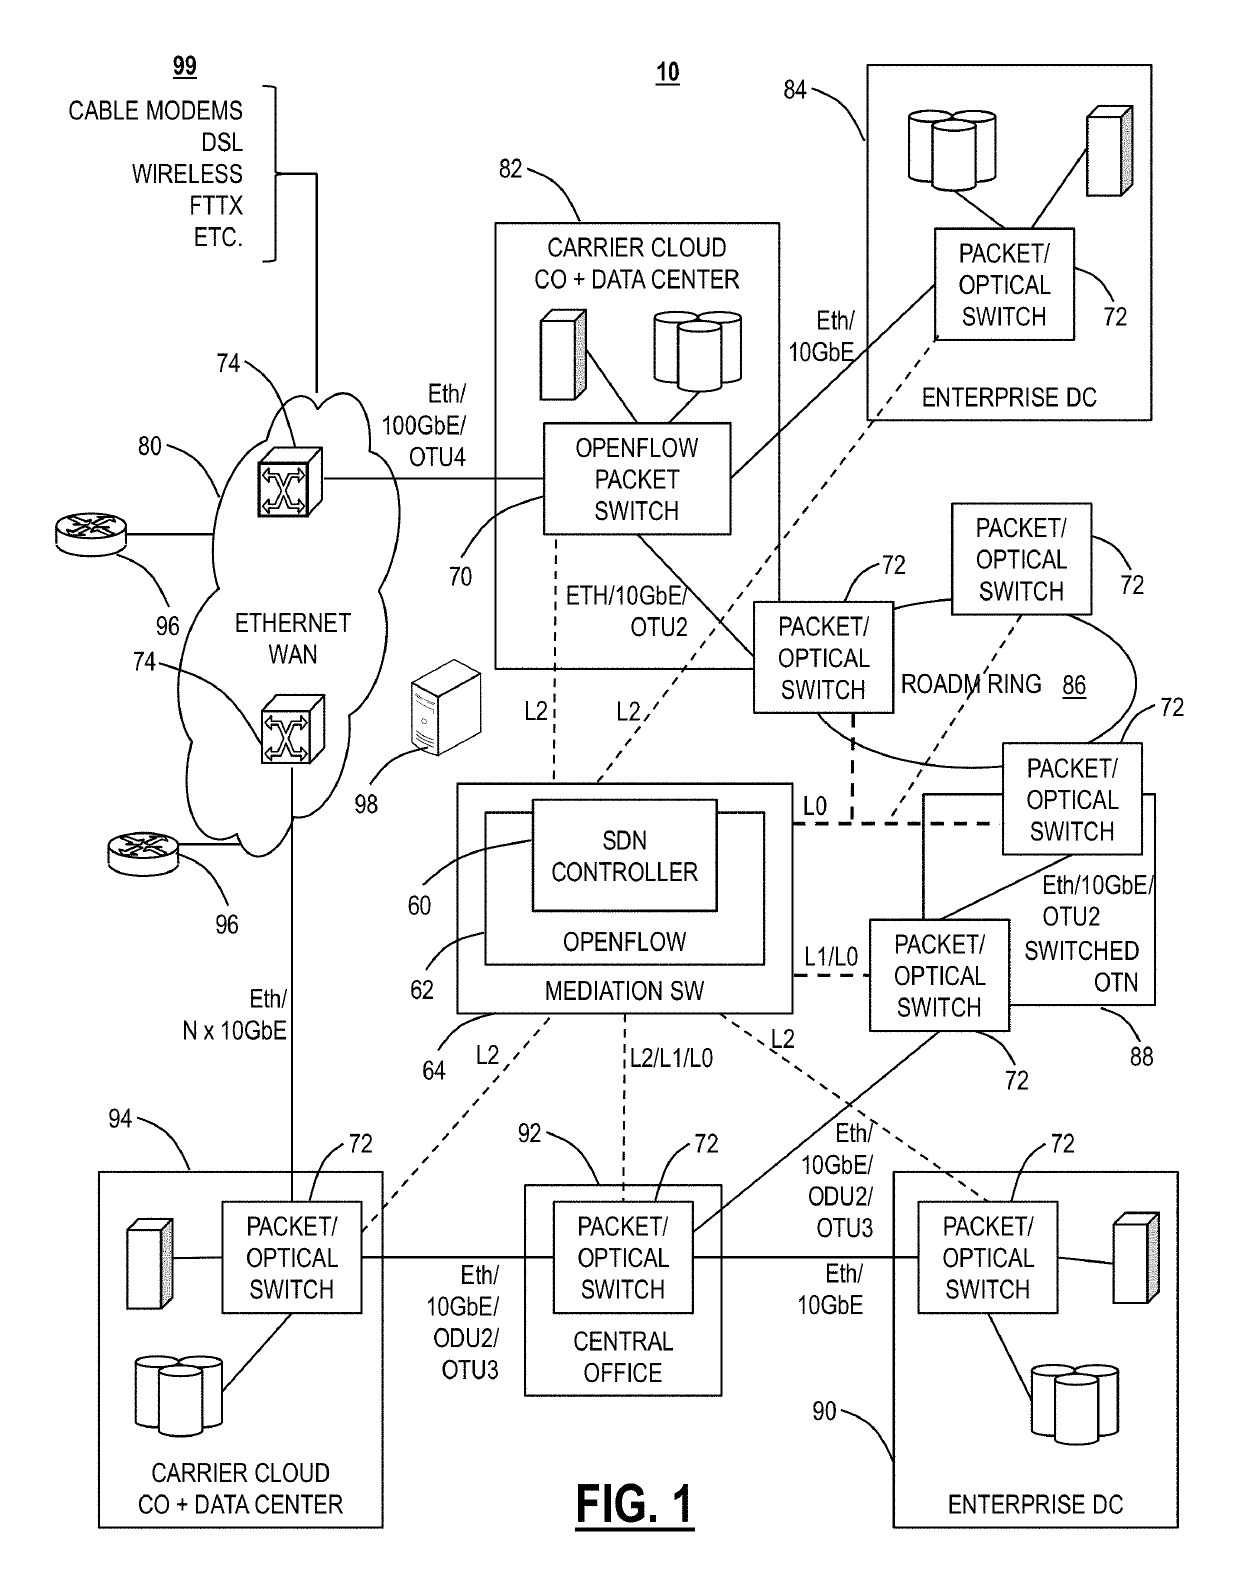 Traffic-adaptive network control systems and methods